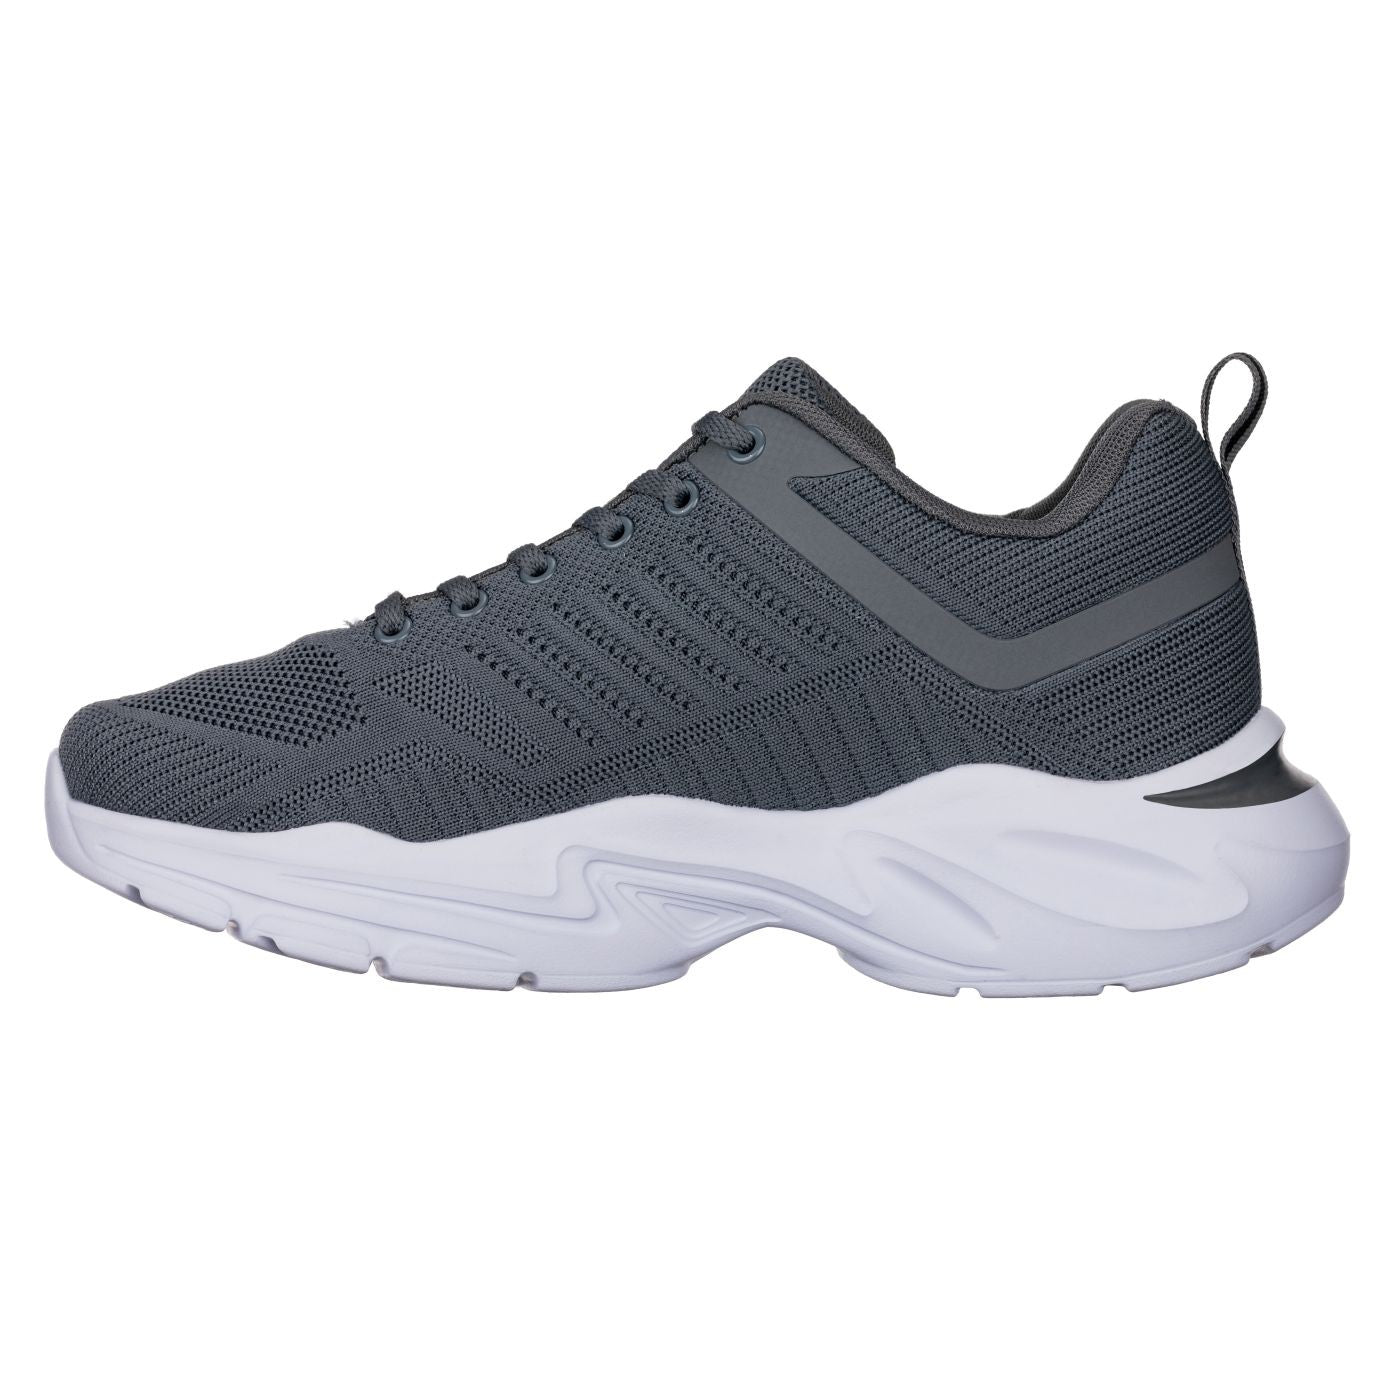 Elevator shoes height increase CALTO - Q332 - 2.6 Inches Taller (Grey/White) - Super Lightweight